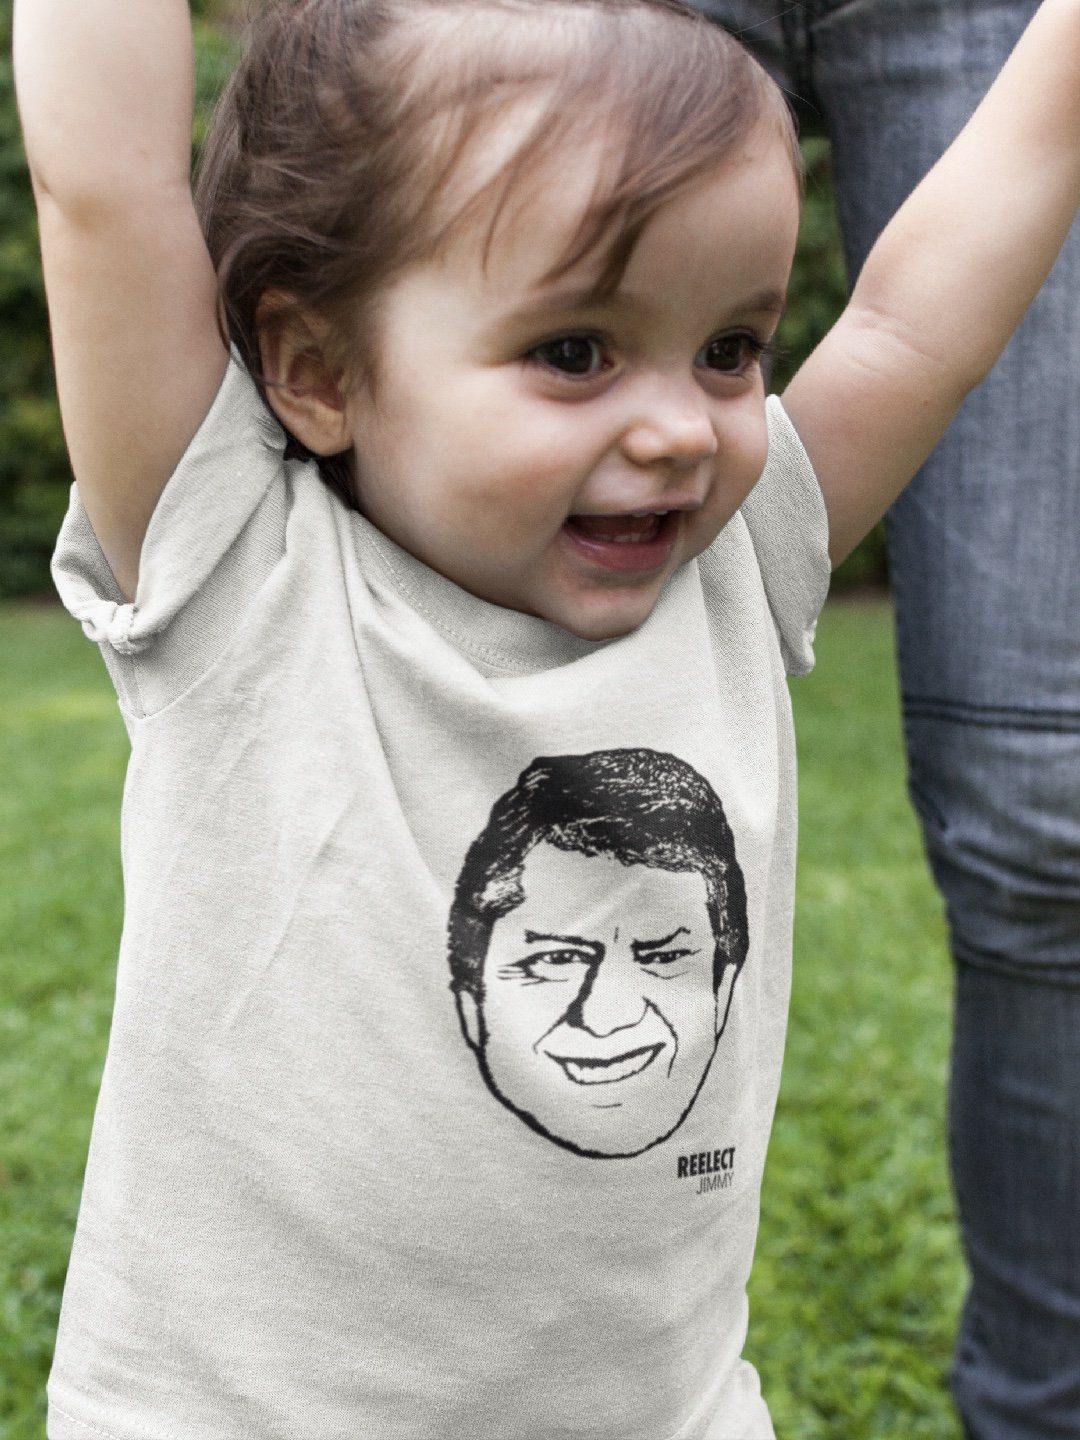 A Leader, for a Change Baby Tee Baby Shirt Reelect Jimmy 